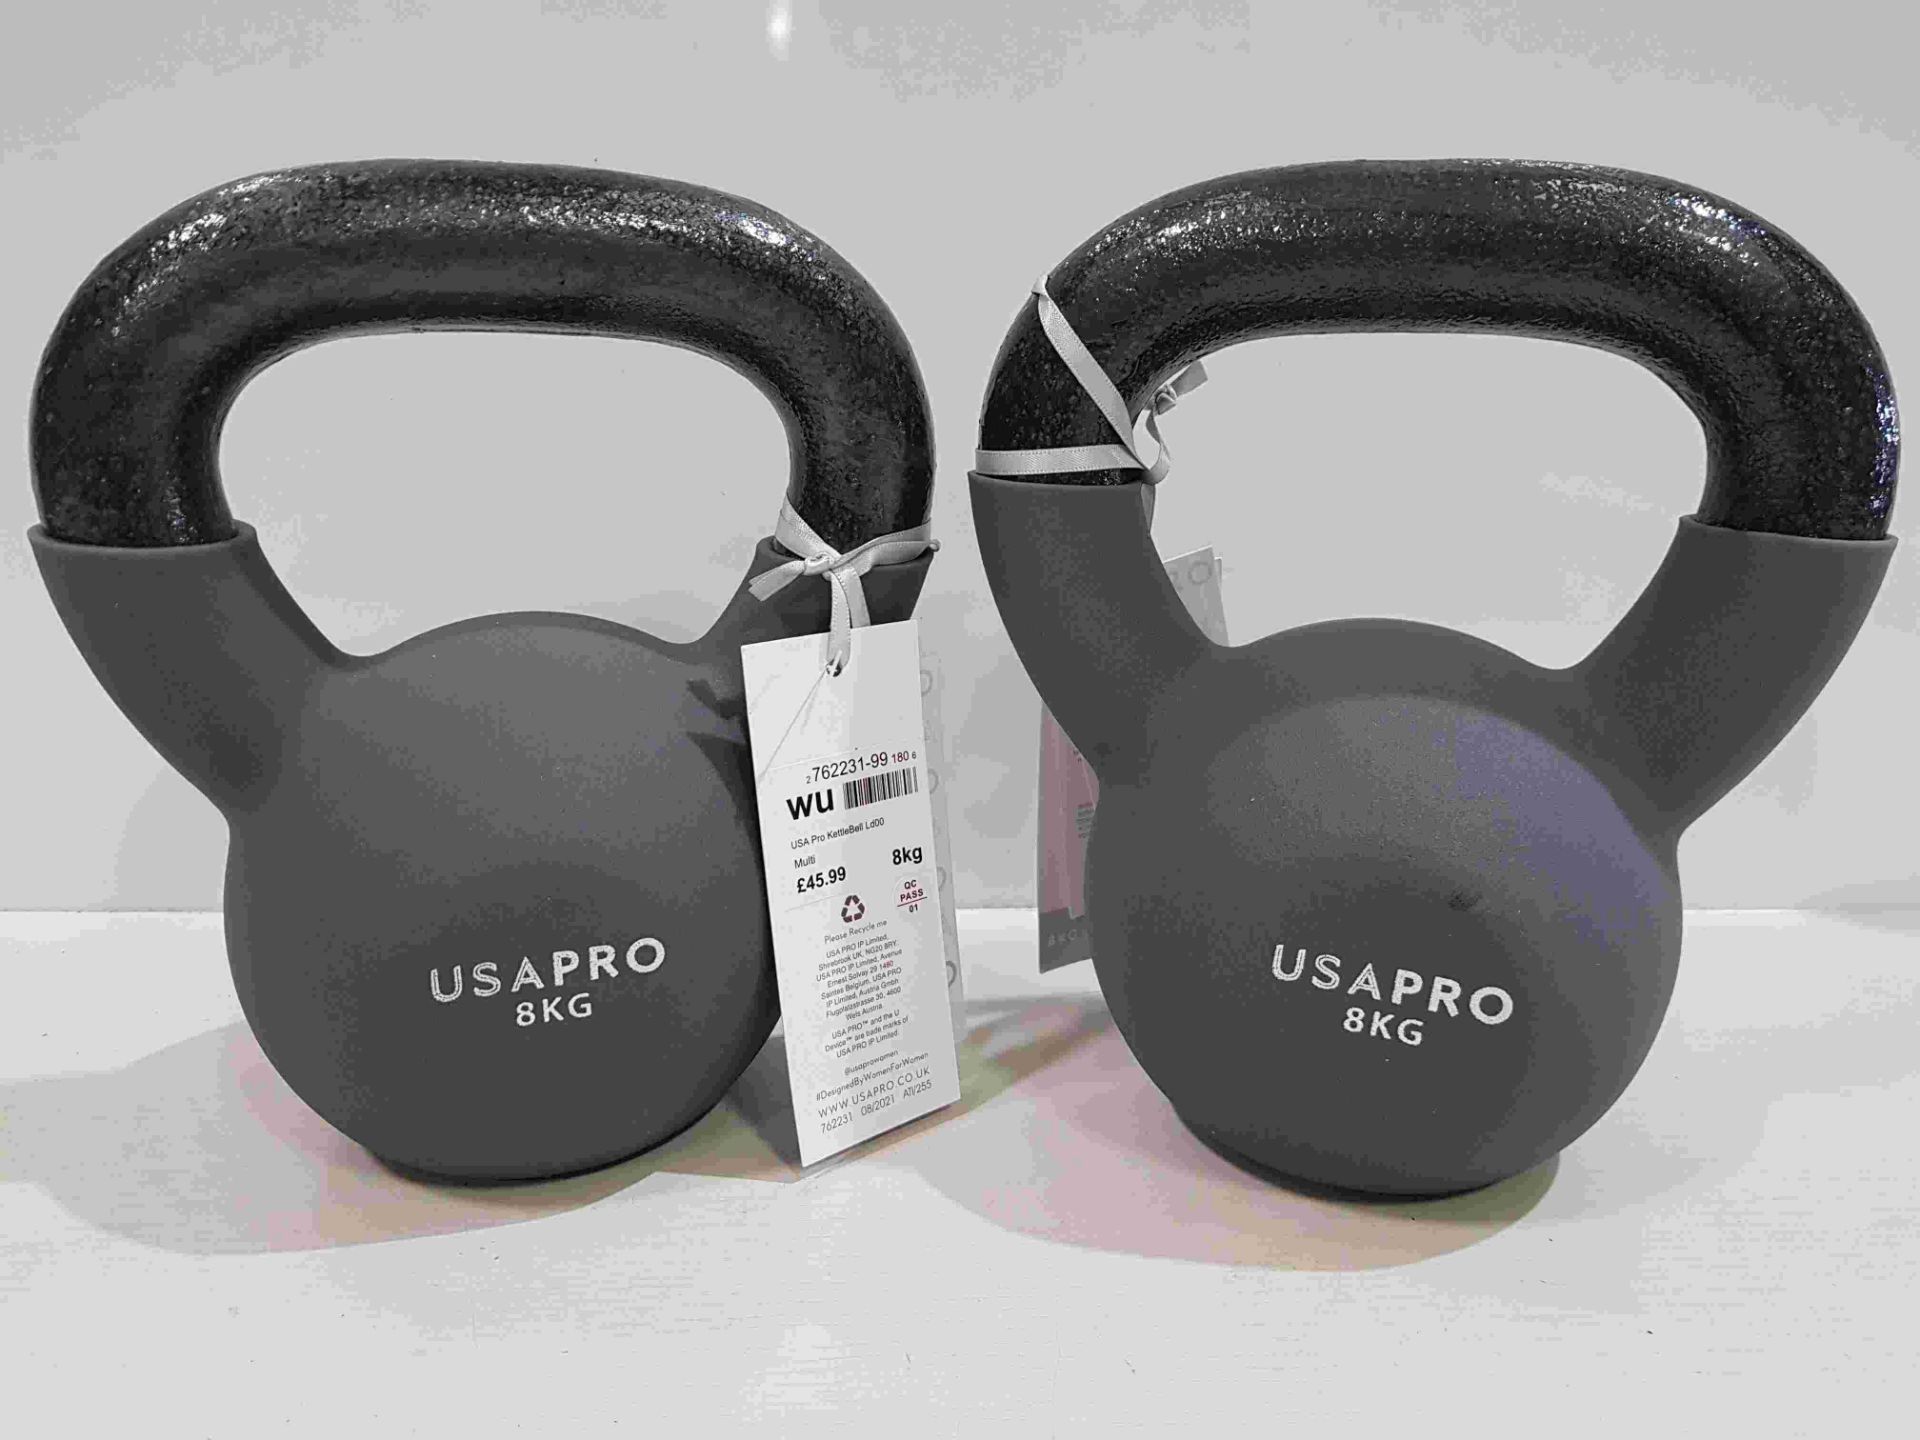 20 X 8KG USA PRO KETTLEBELLS (10 X PAIRS) RRP: £45.99 PER PIECE - £91.98 PR - TOTAL £919.80 - NOTE